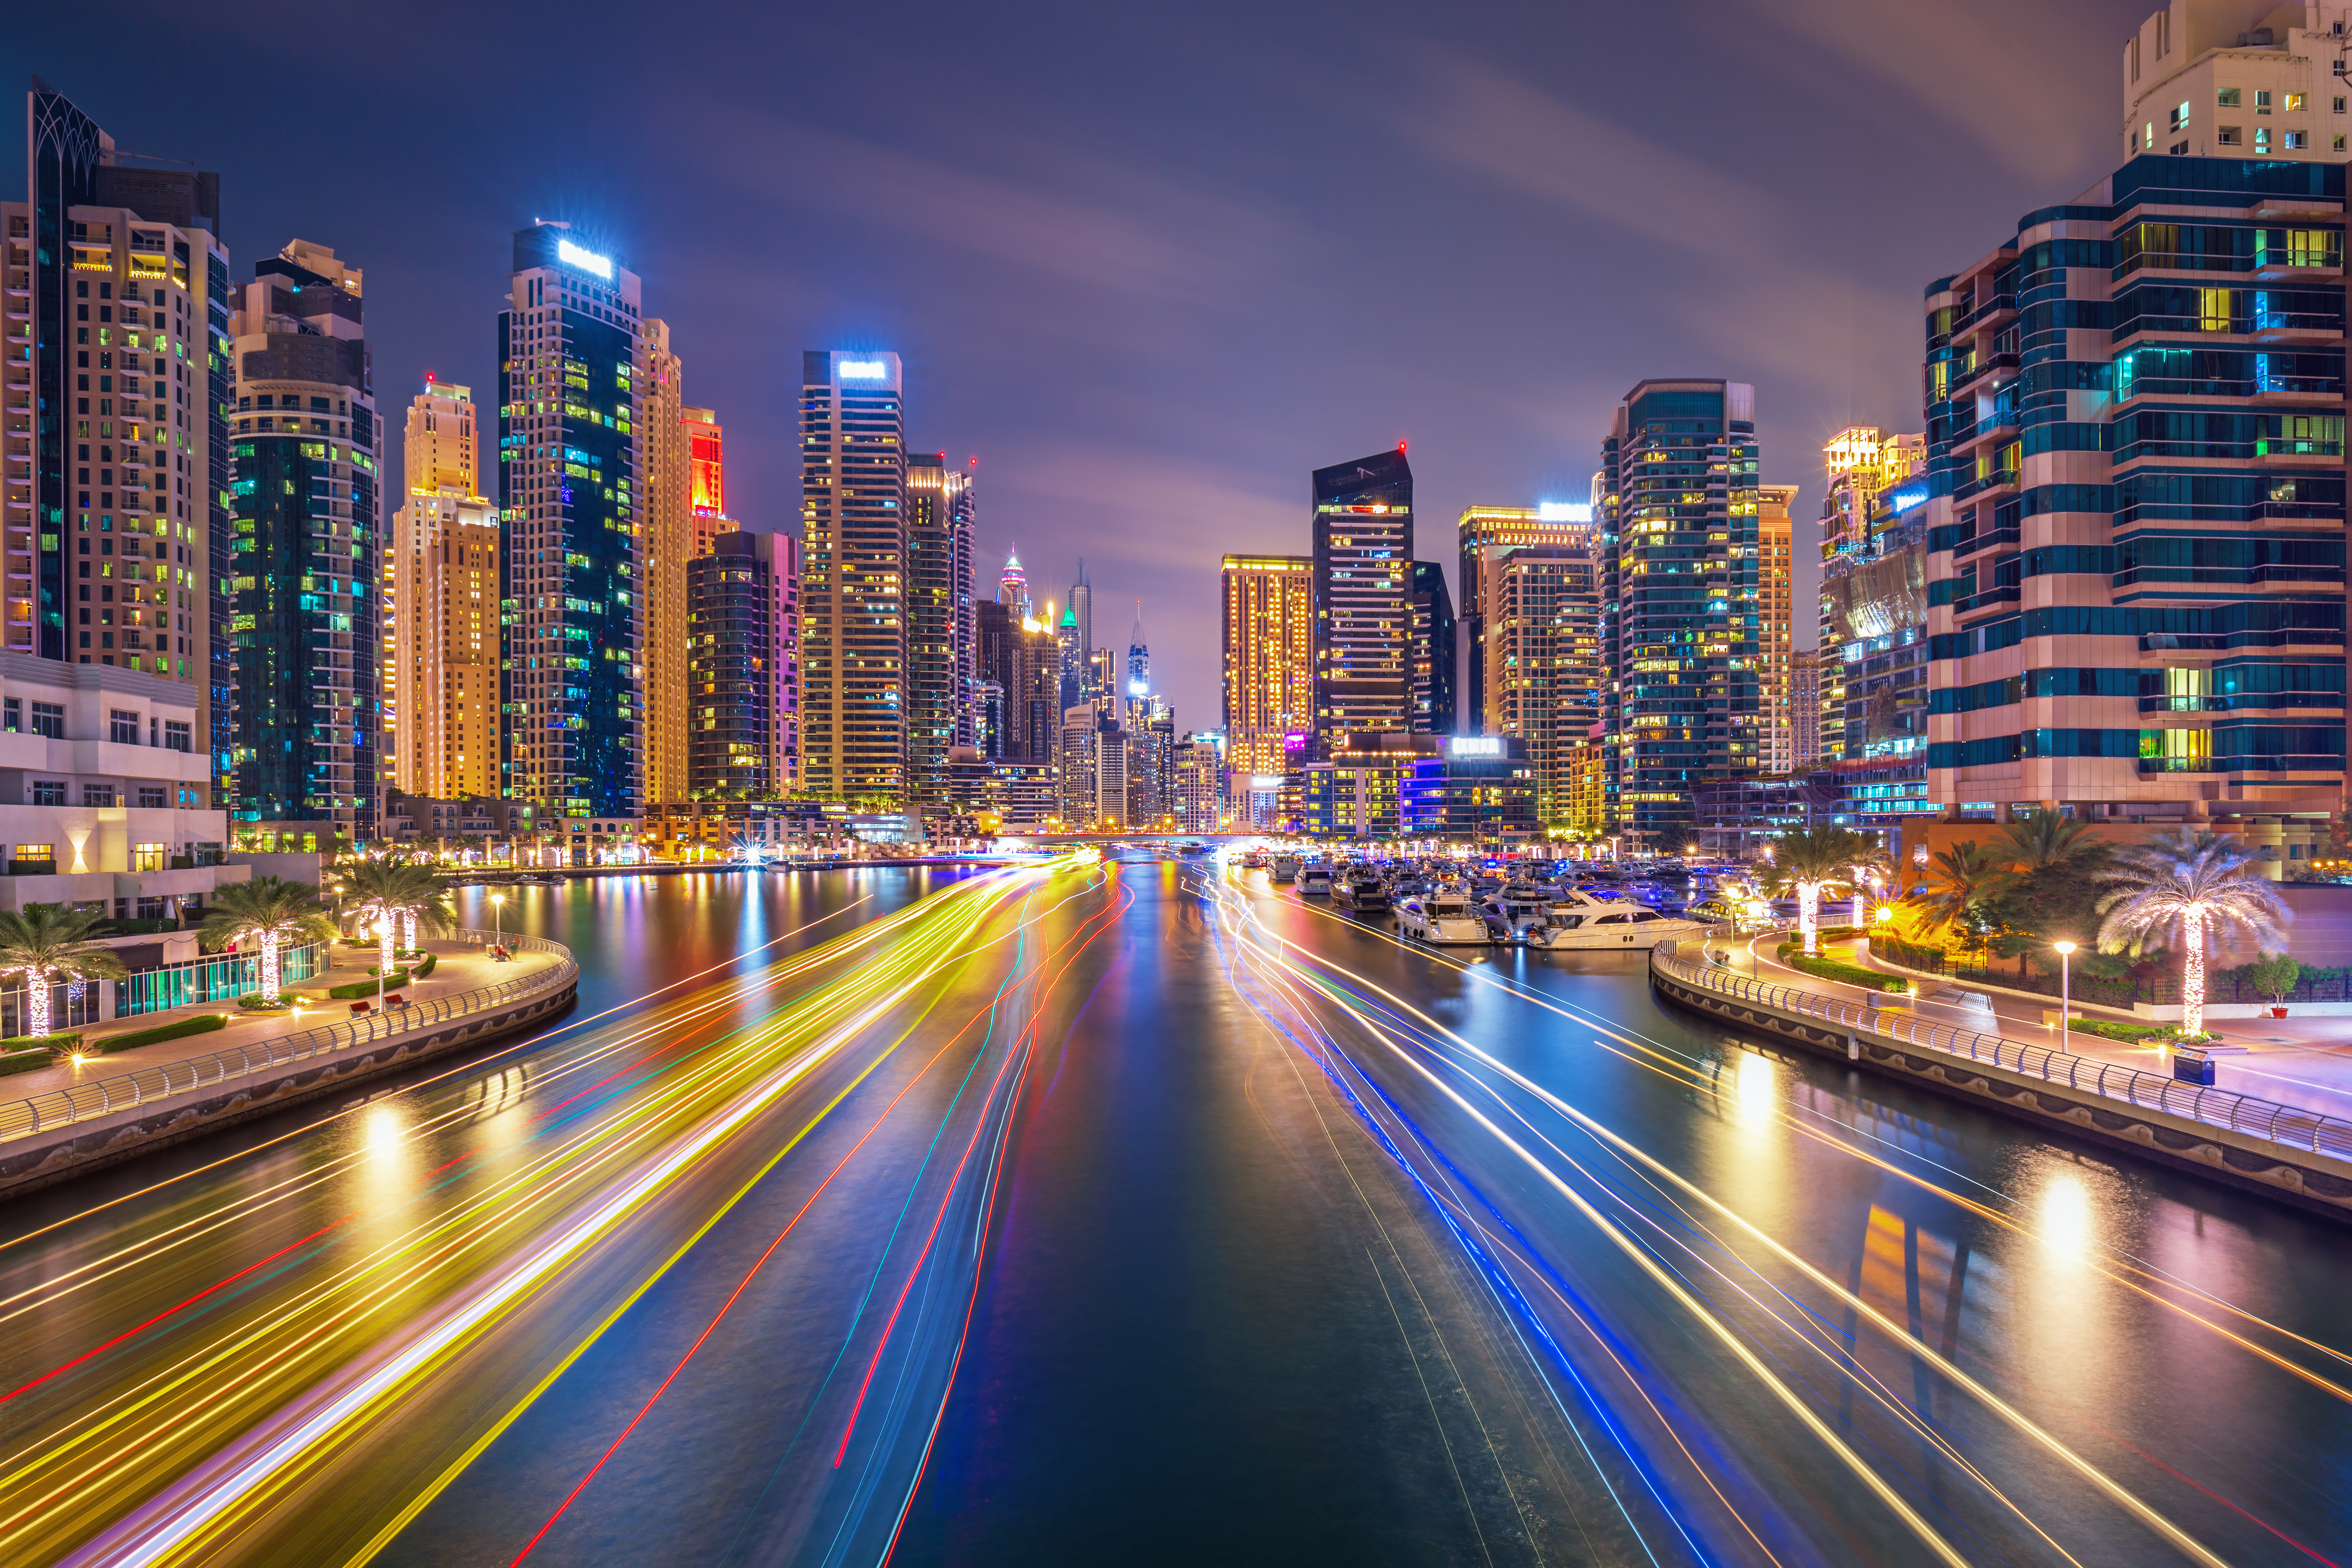 Dubai tourism sector set to eclipse pre-pandemic performance in 2023